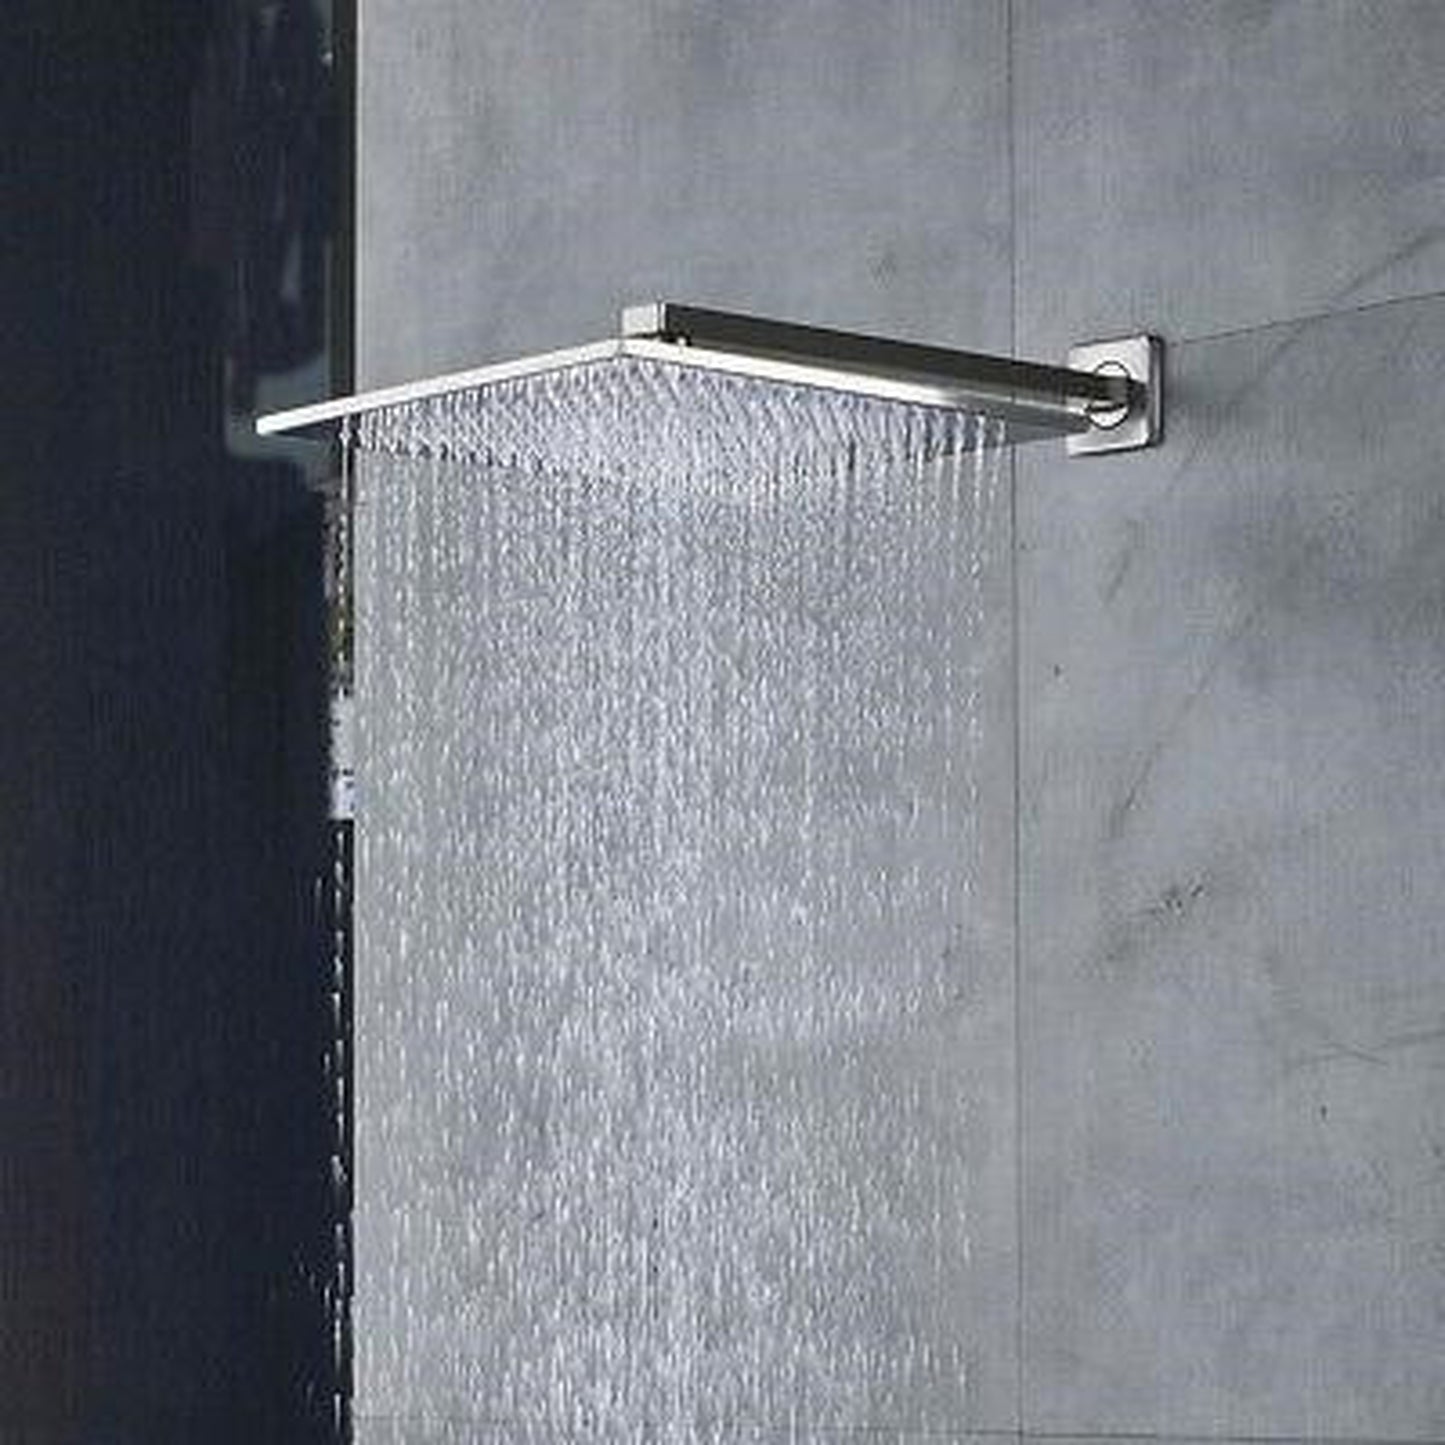 Fontana Monro 10" Chrome Square Wall-Mounted LED Shower Set With Multi-Level Mixer and Hand Shower